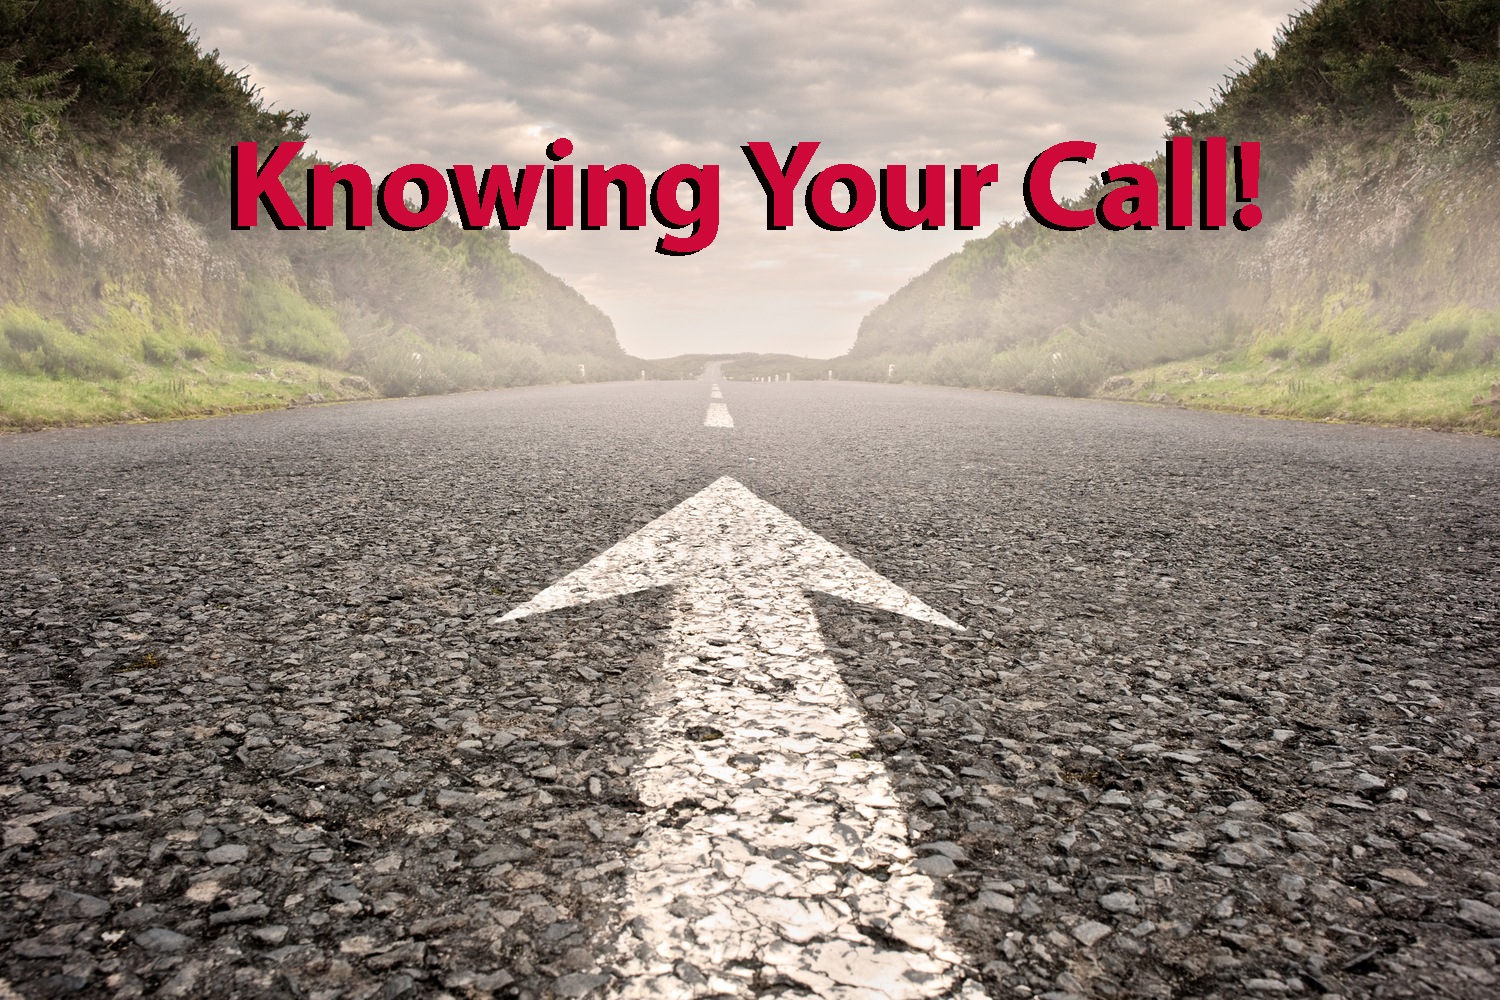 Knowing your call